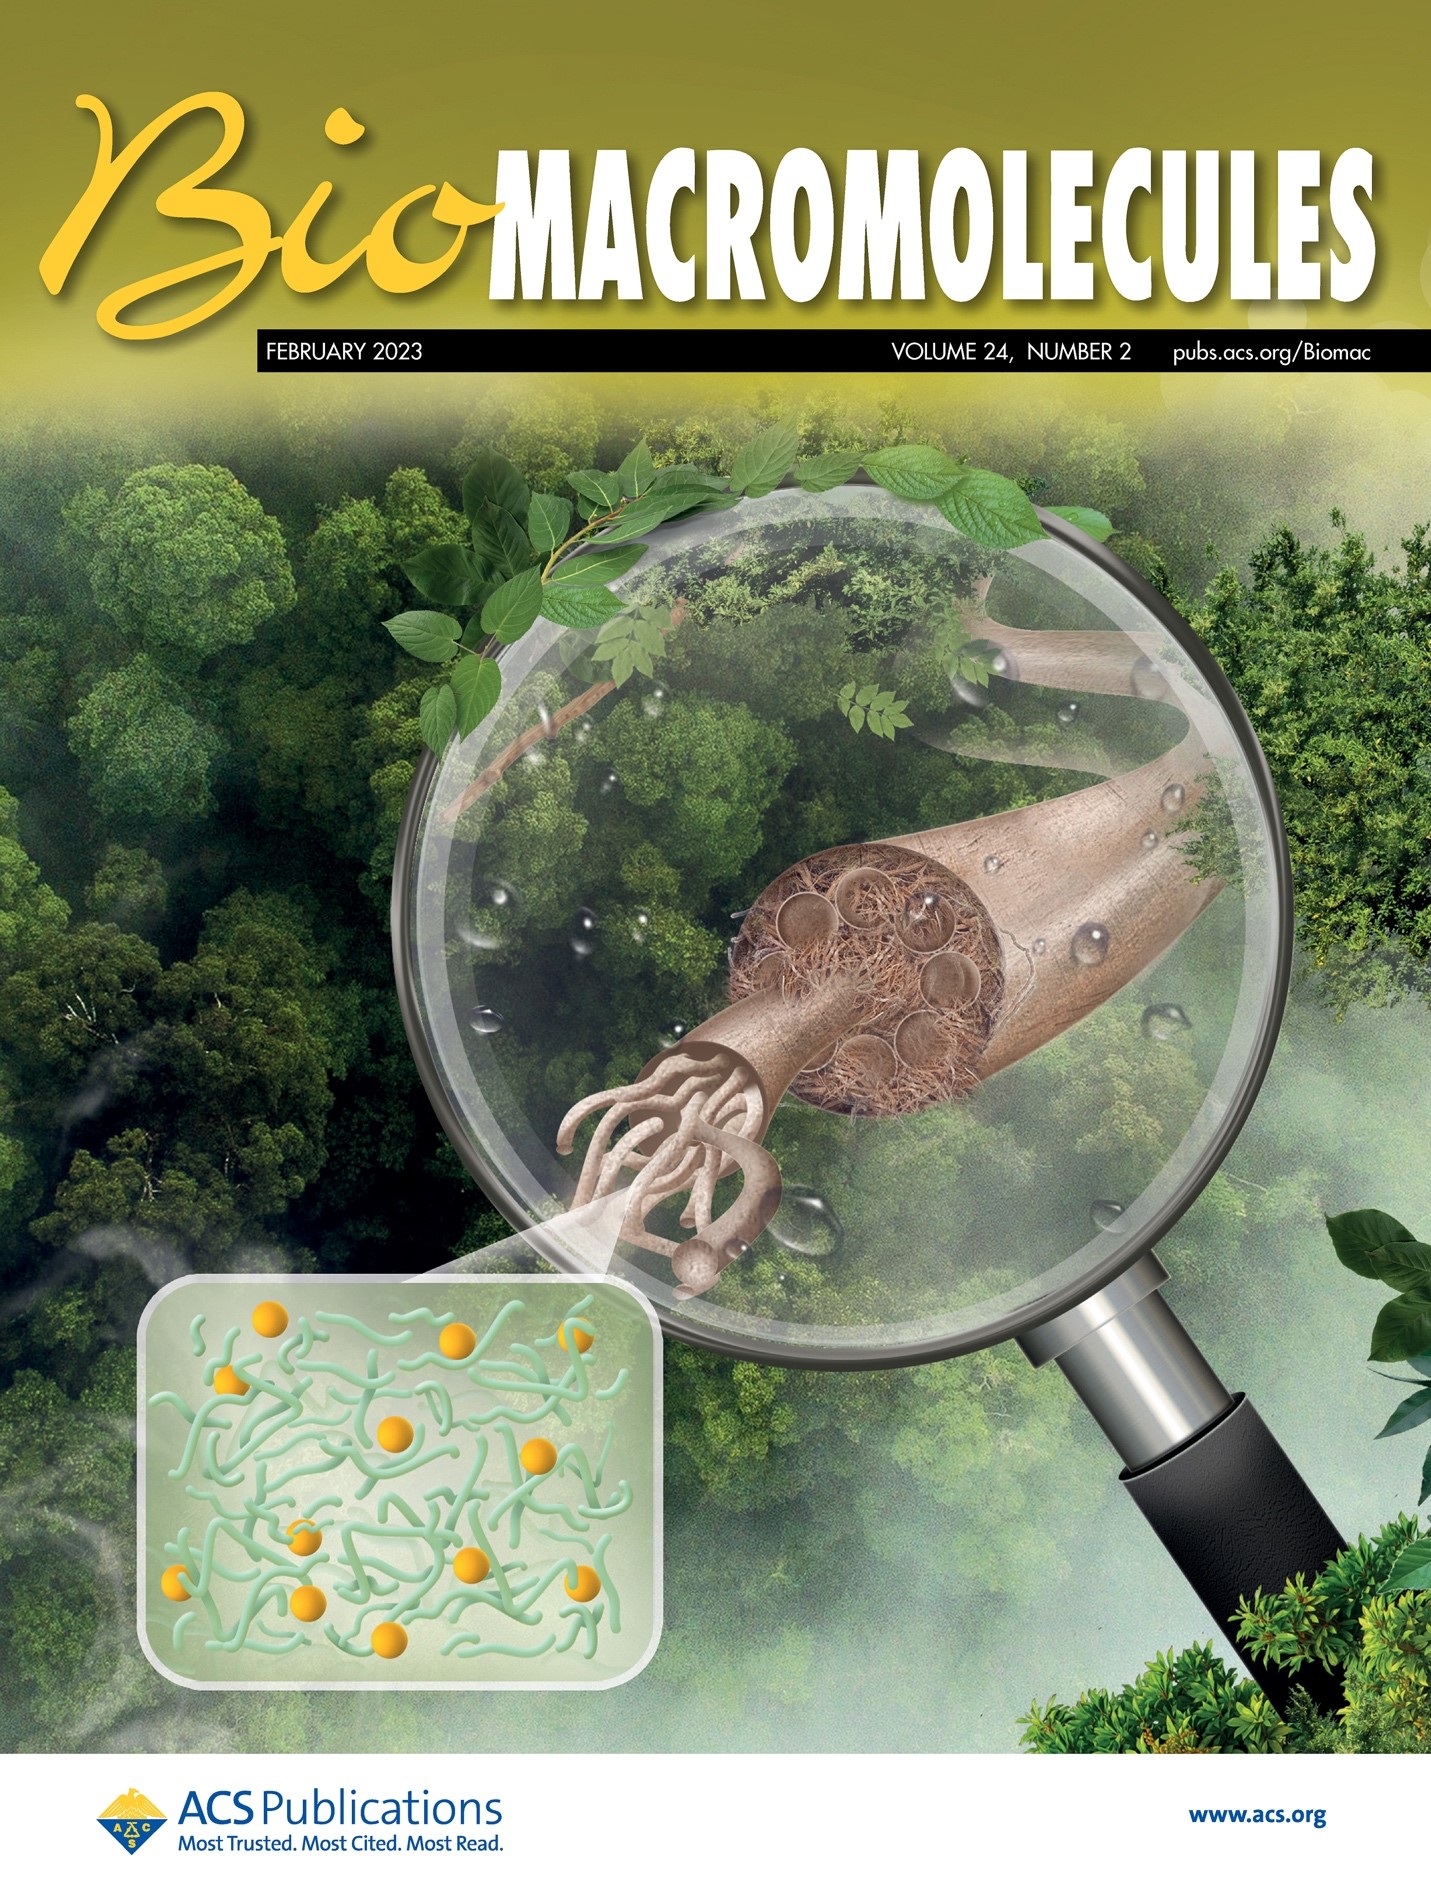 The cover of the February 2023 edition of Bio Macromolecules